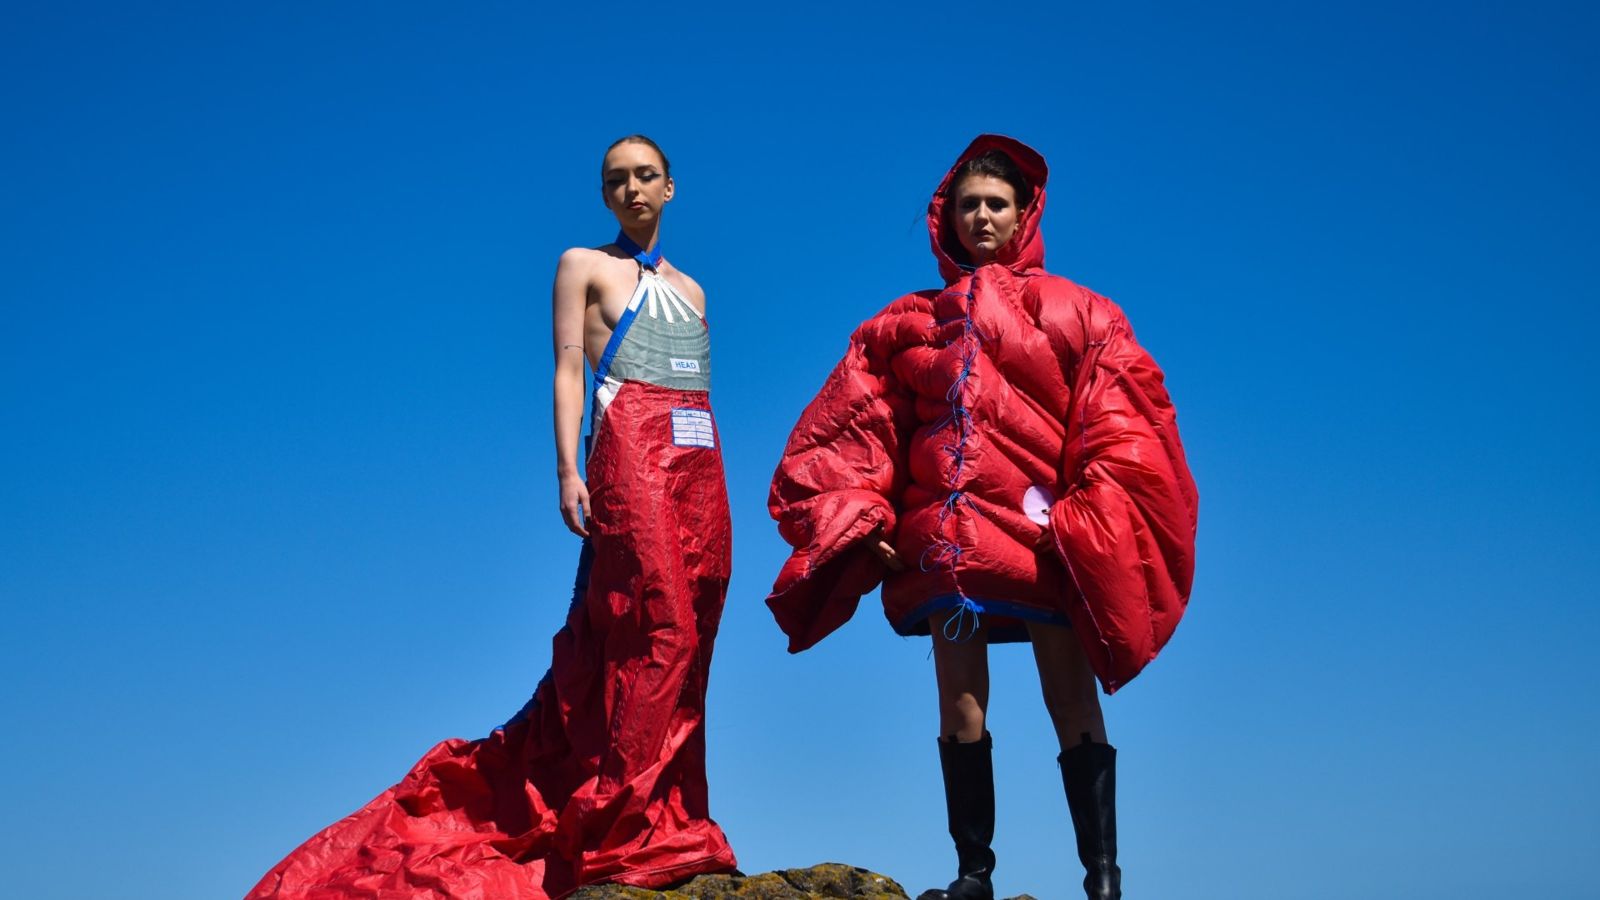 Two models stand on rocks with a blue sky in the background, one wears a red hand made puffer jacket and the other wears a long red gown. Both are made from sailcloth